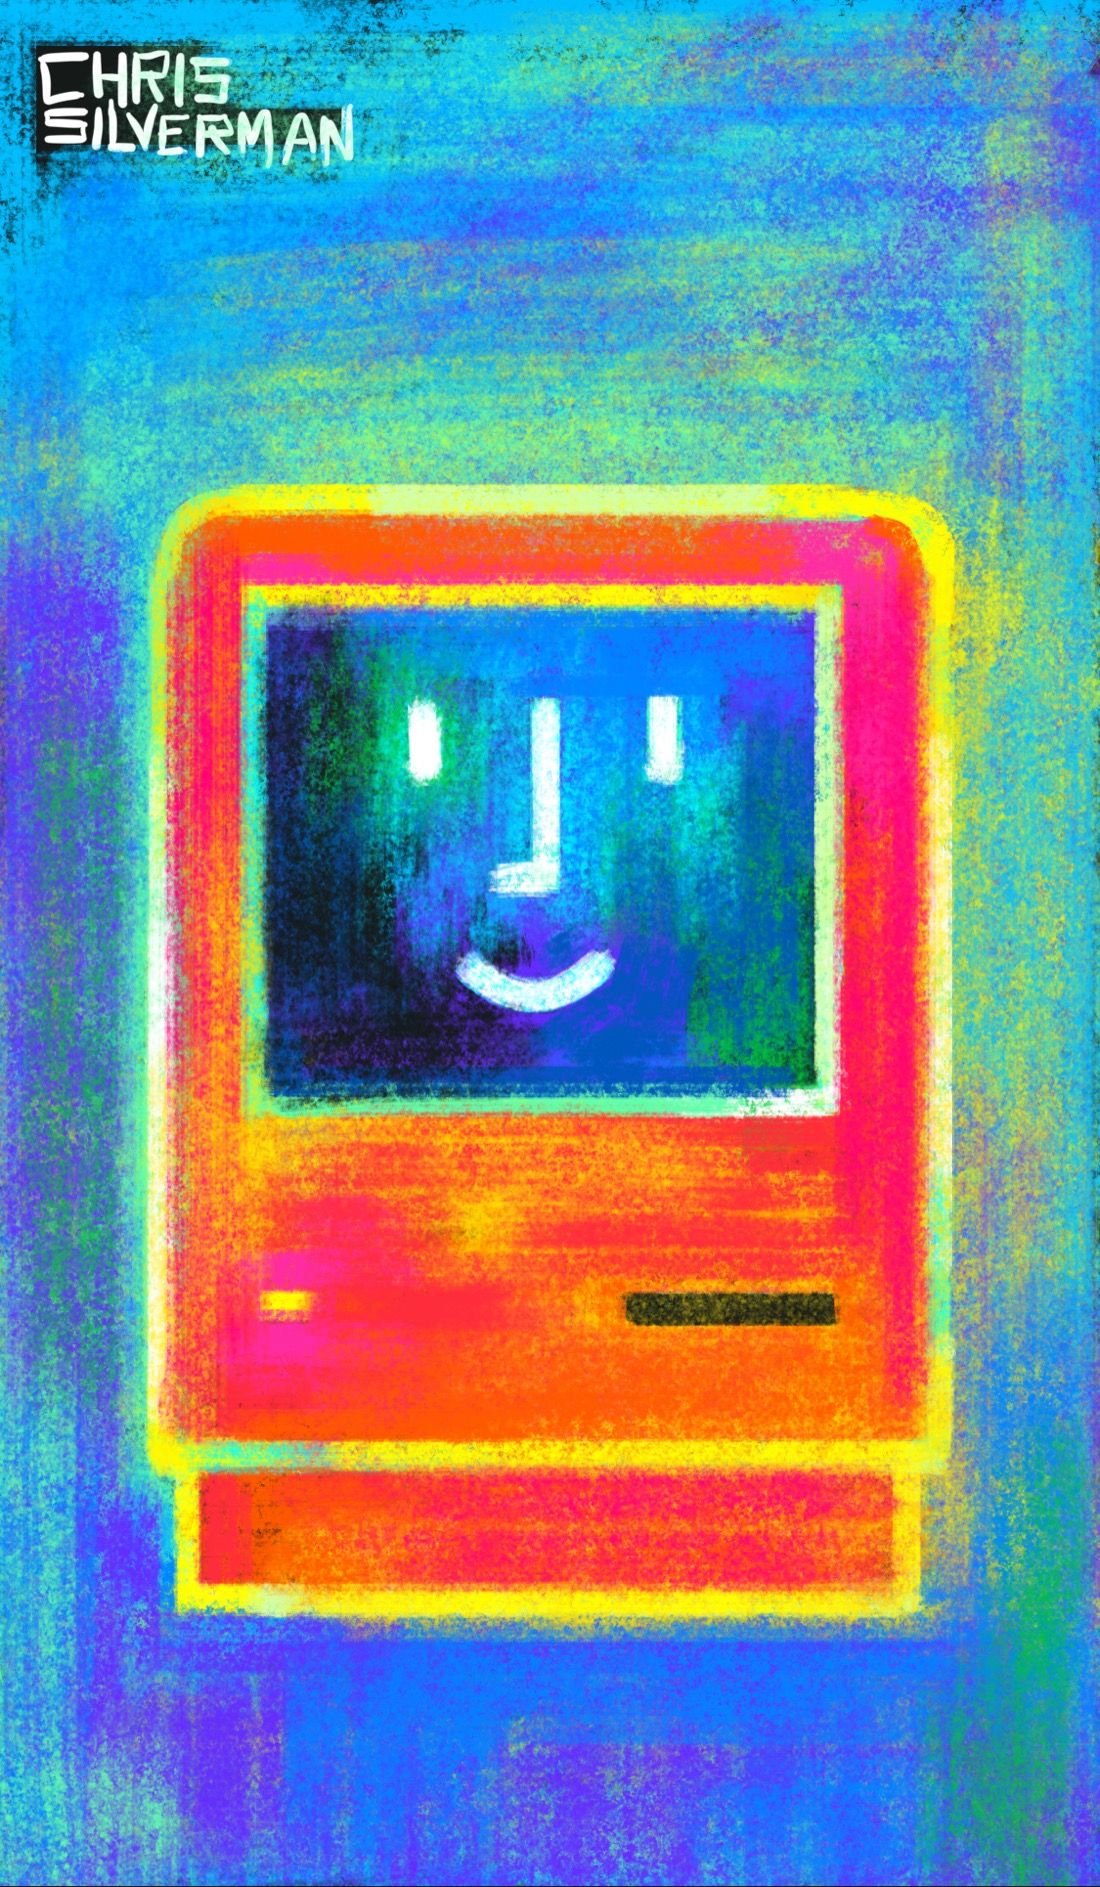 A blue background, heavily textured, with brushstrokes of various blues and greens. Placed in the middle is a glowing red, "happy Mac" icon, framed by rough, yellow, white, and neon green brushstrokes.